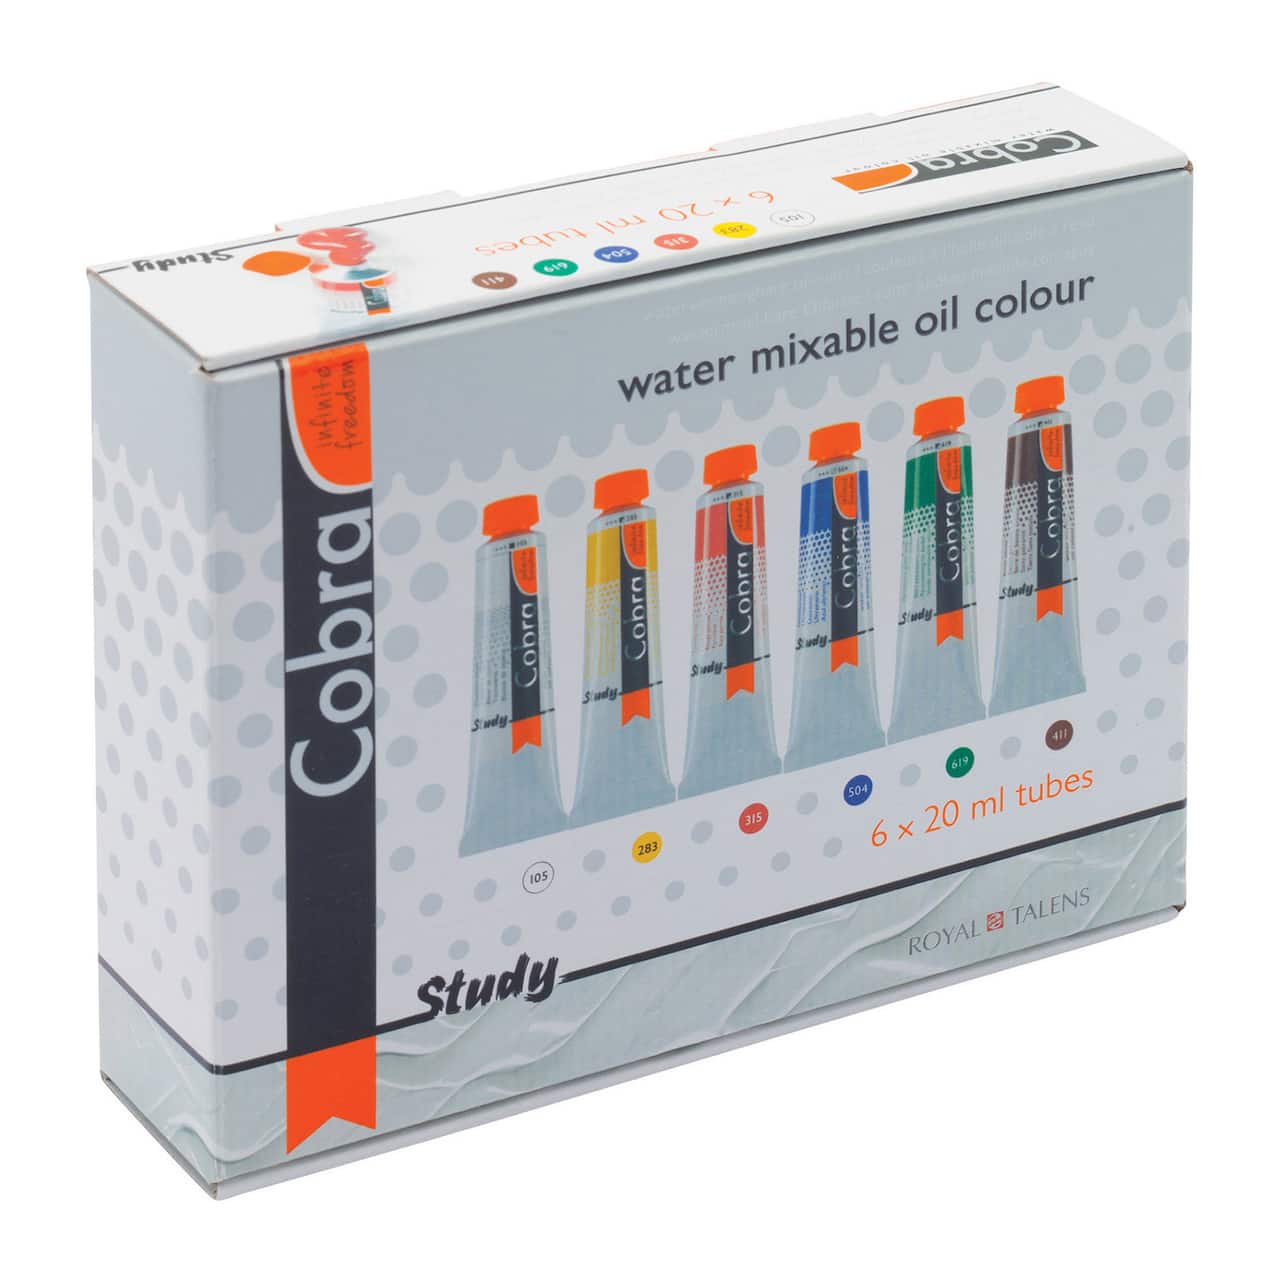 Cobra Study Water Mixable Oil Colour Starter Set